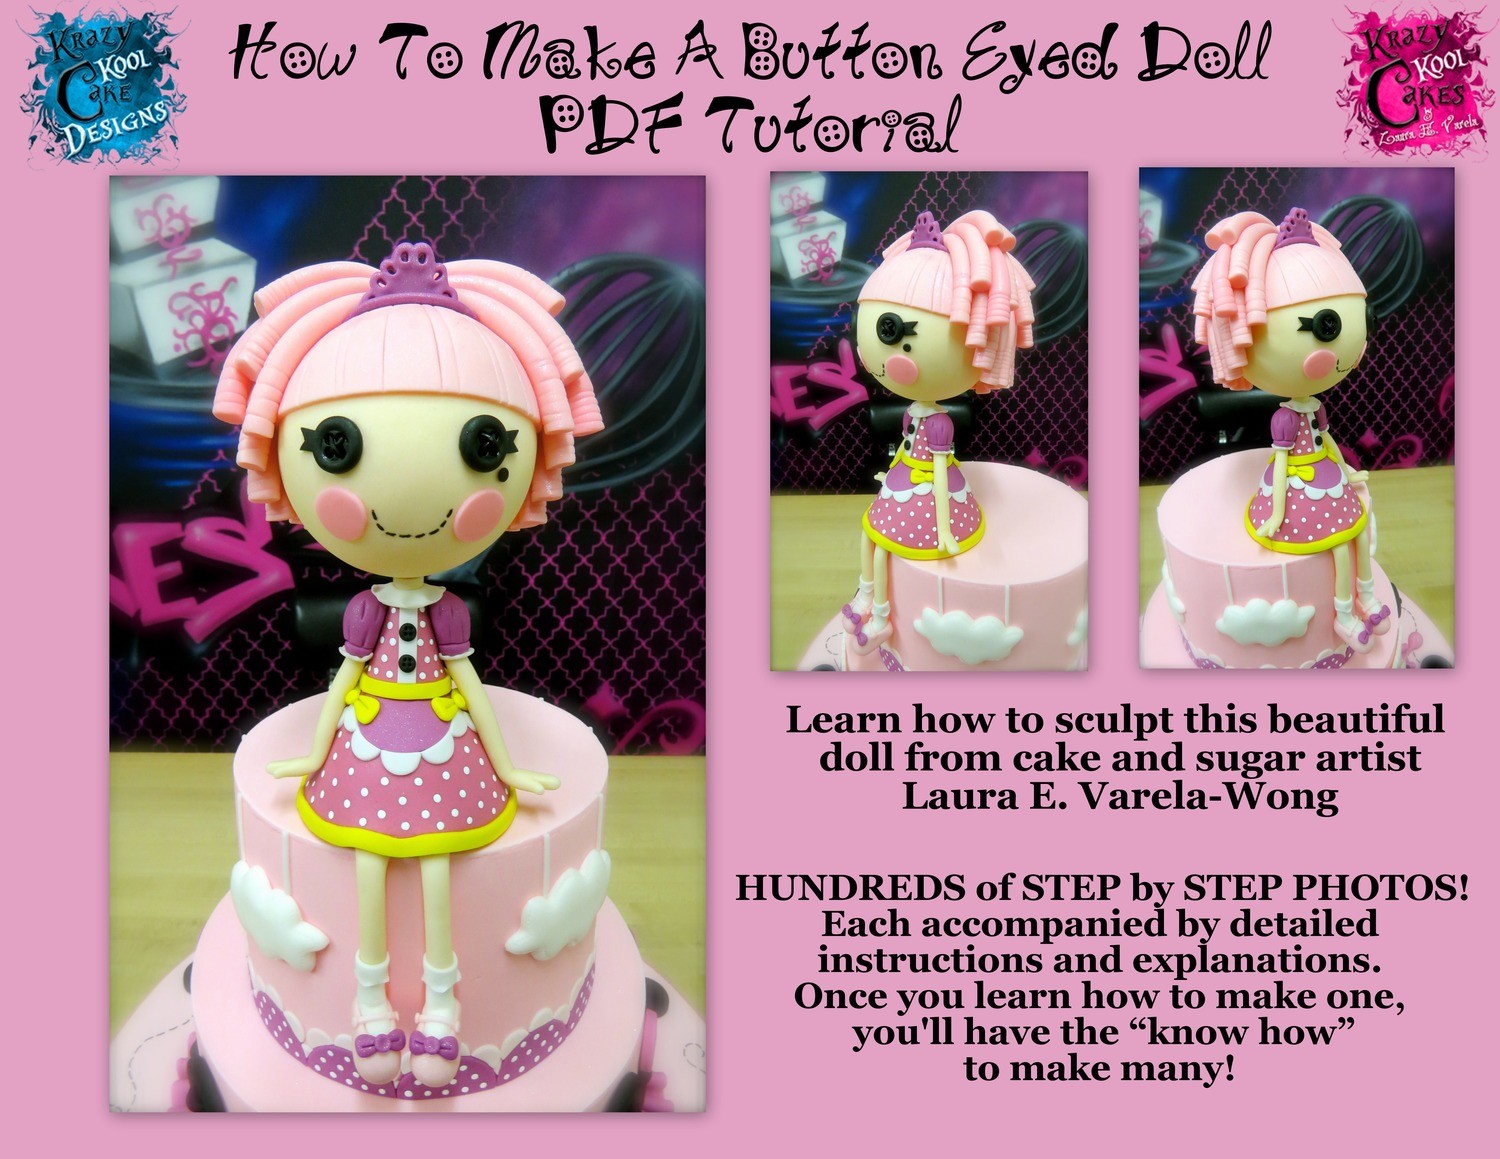 How To Make A Button Eyed Doll PDF Tutorial